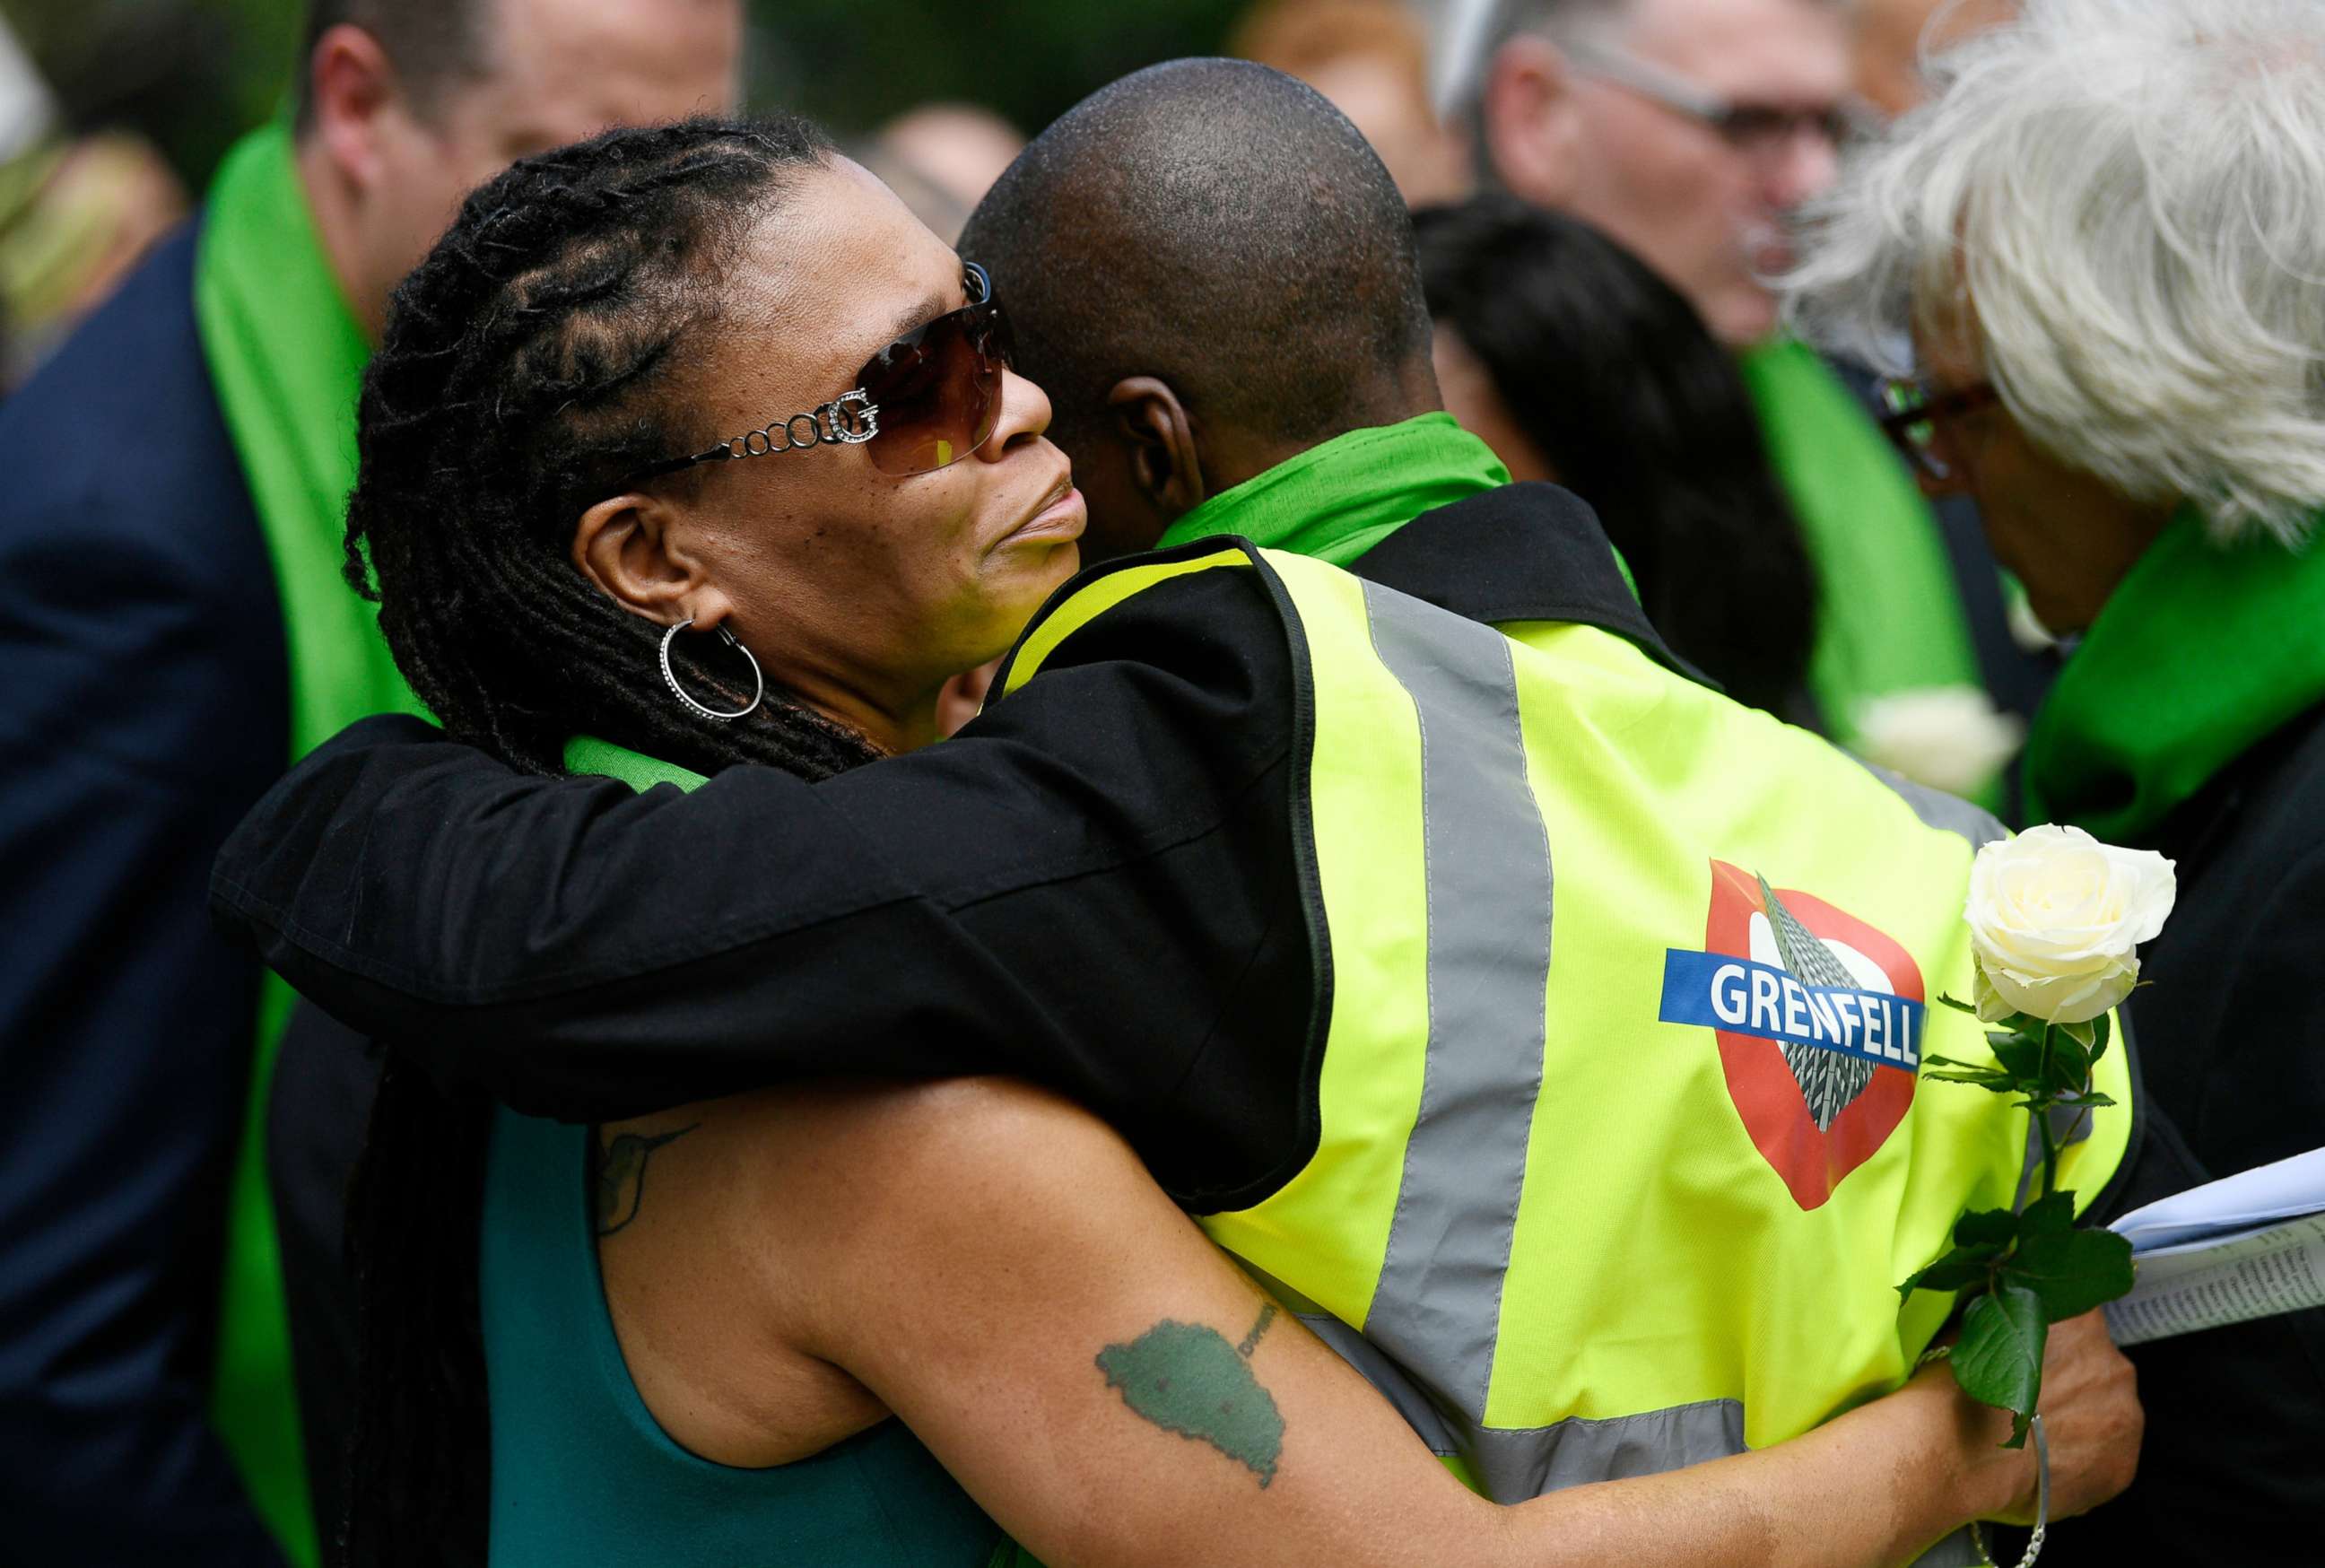 PHOTO: Friends and relatives of victims of the Grenfell fire react before taking part in a silent procession, in tribute to victims as they mark one year anniversary of the fire in London, June 14, 2018.